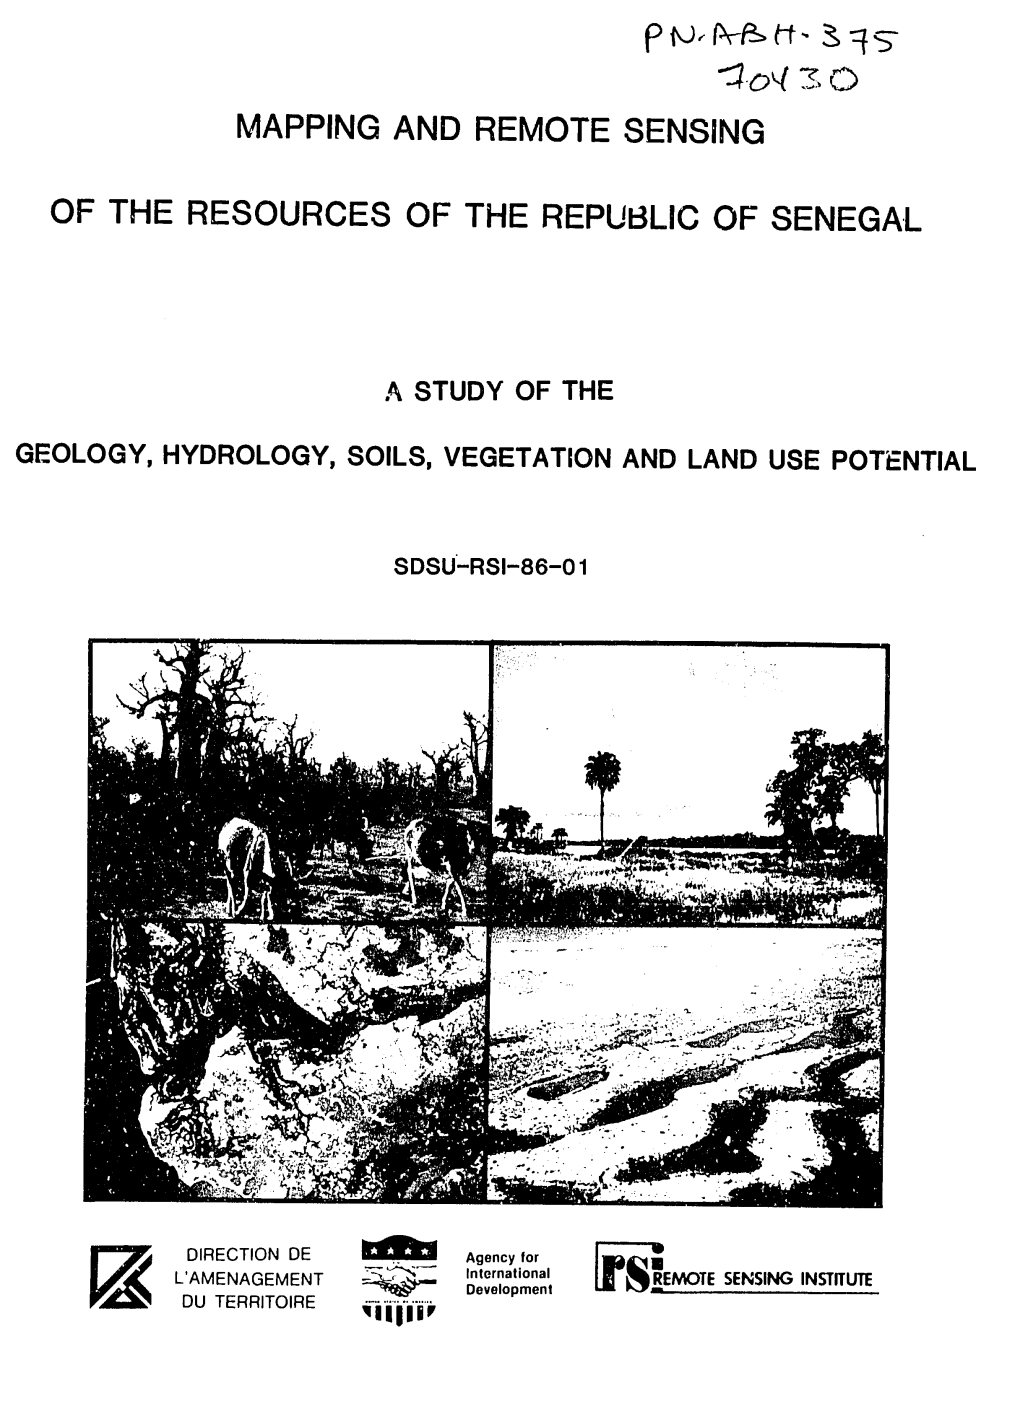 Mapping and Remote Sensing of the Resources of the Republic of Senegal